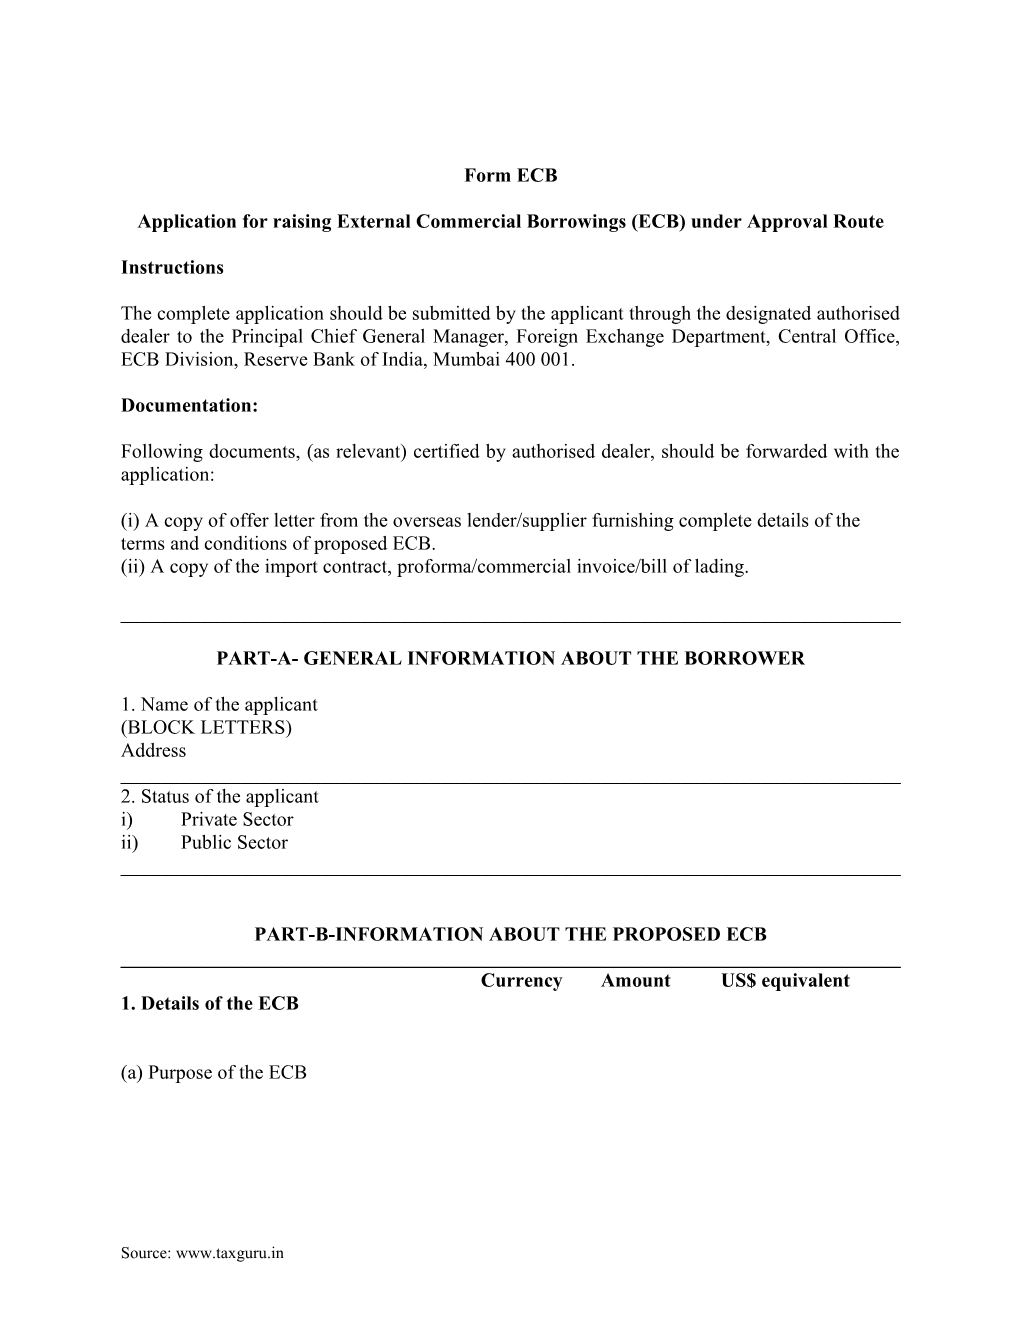 Application for Raising External Commercial Borrowings (ECB) Under Approval Route